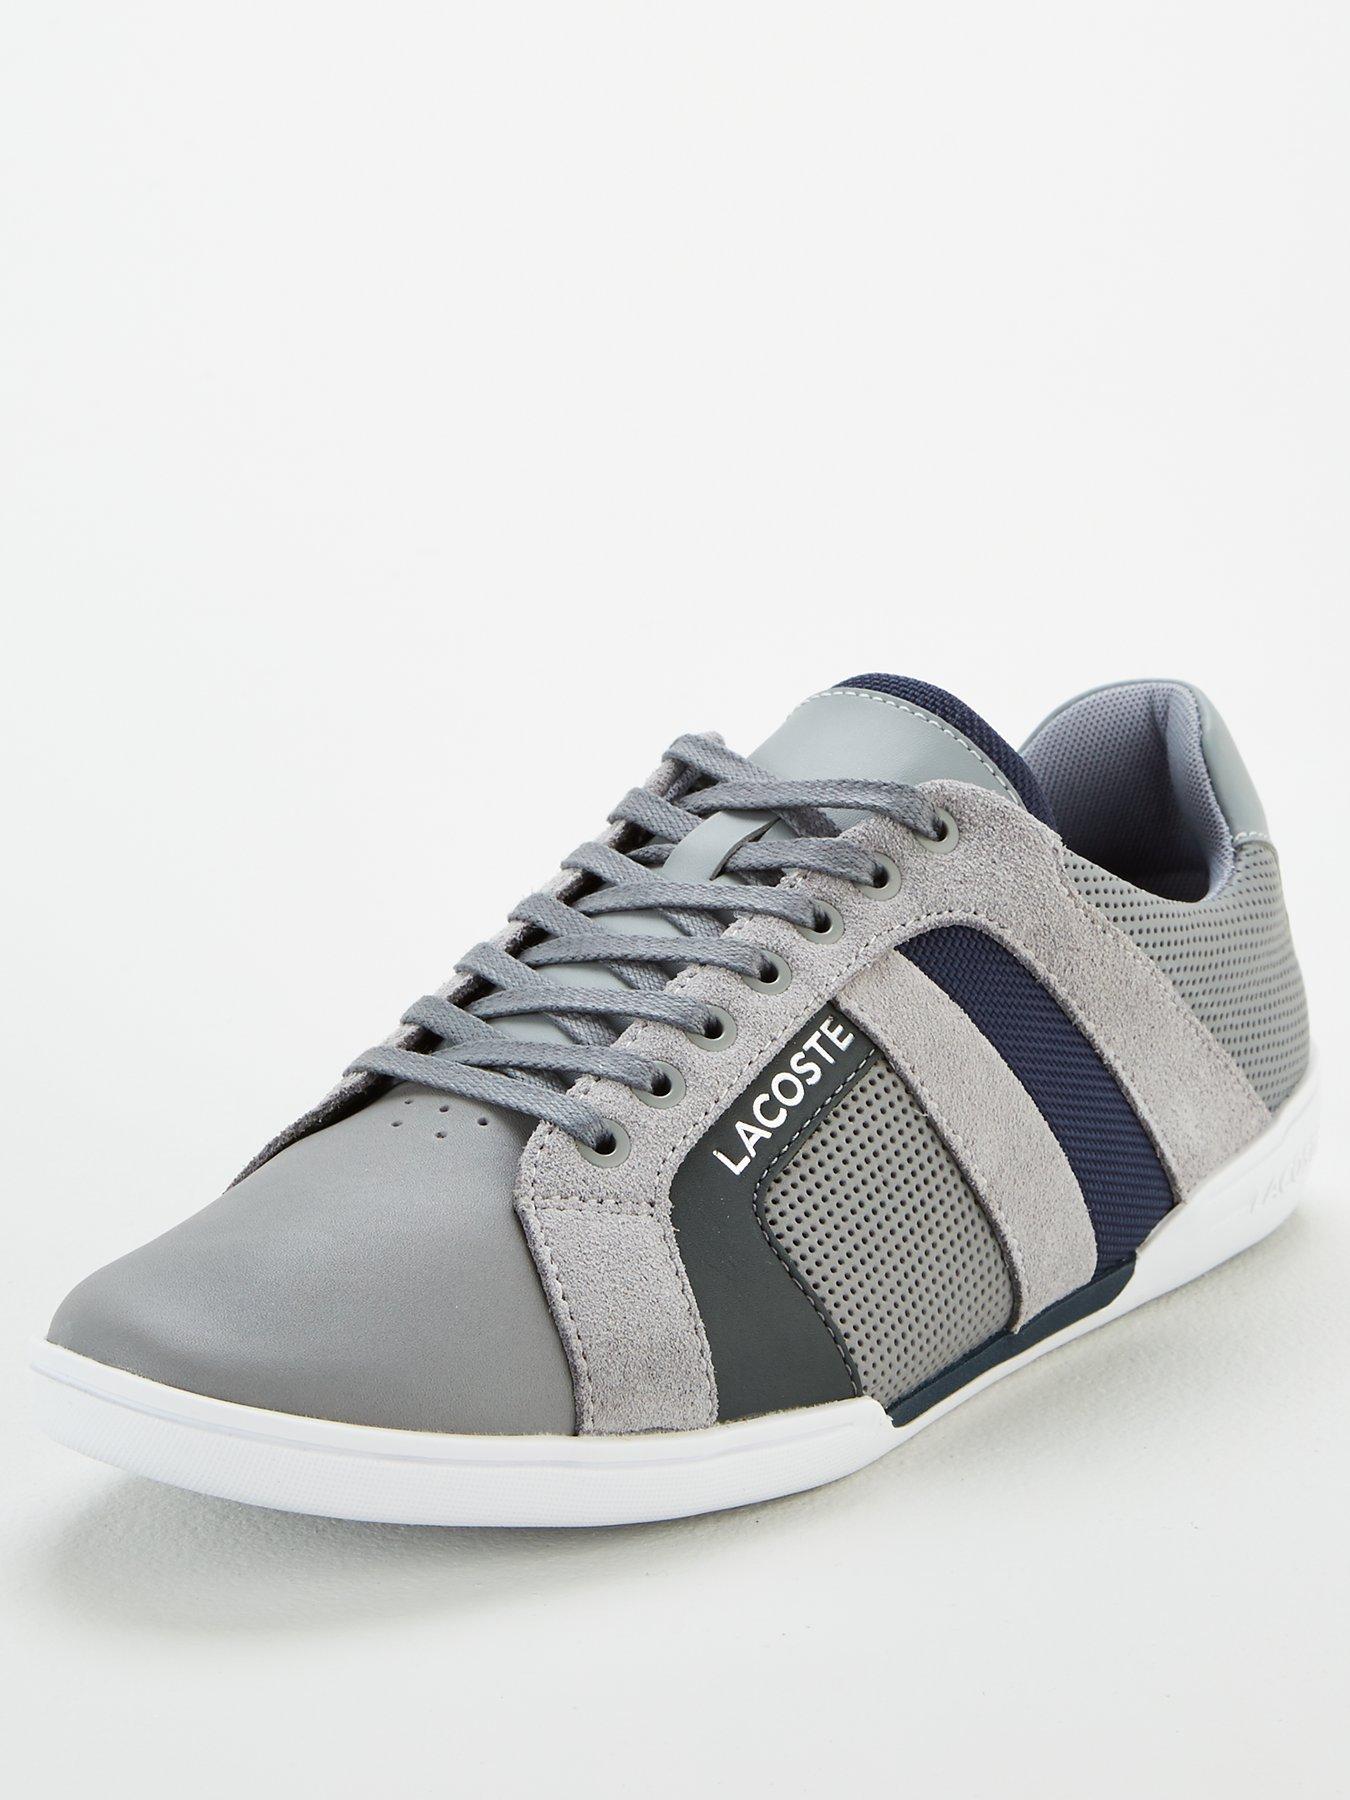 Lacoste Chaymon Leather Trainers - Grey 